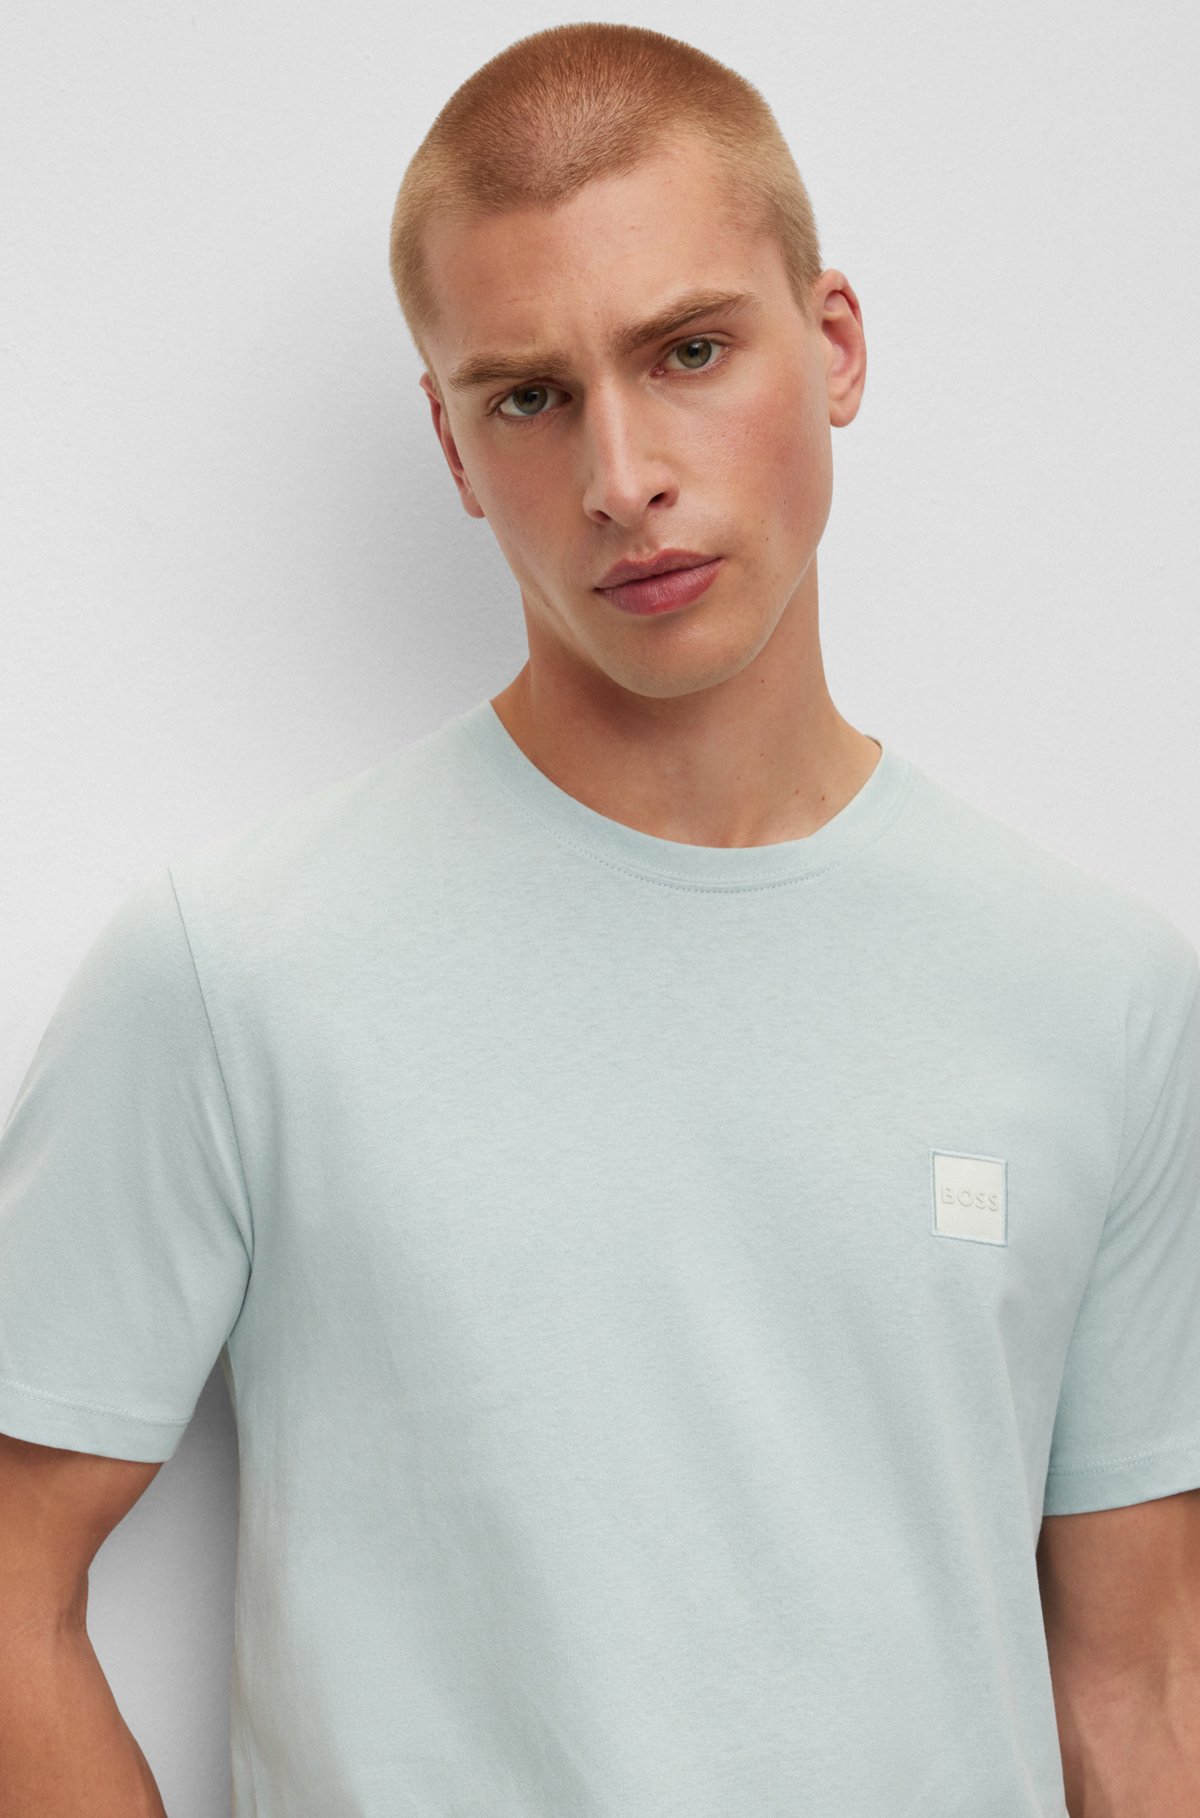 Relaxed-fit T-shirt in cotton jersey with logo patch, Light Blue